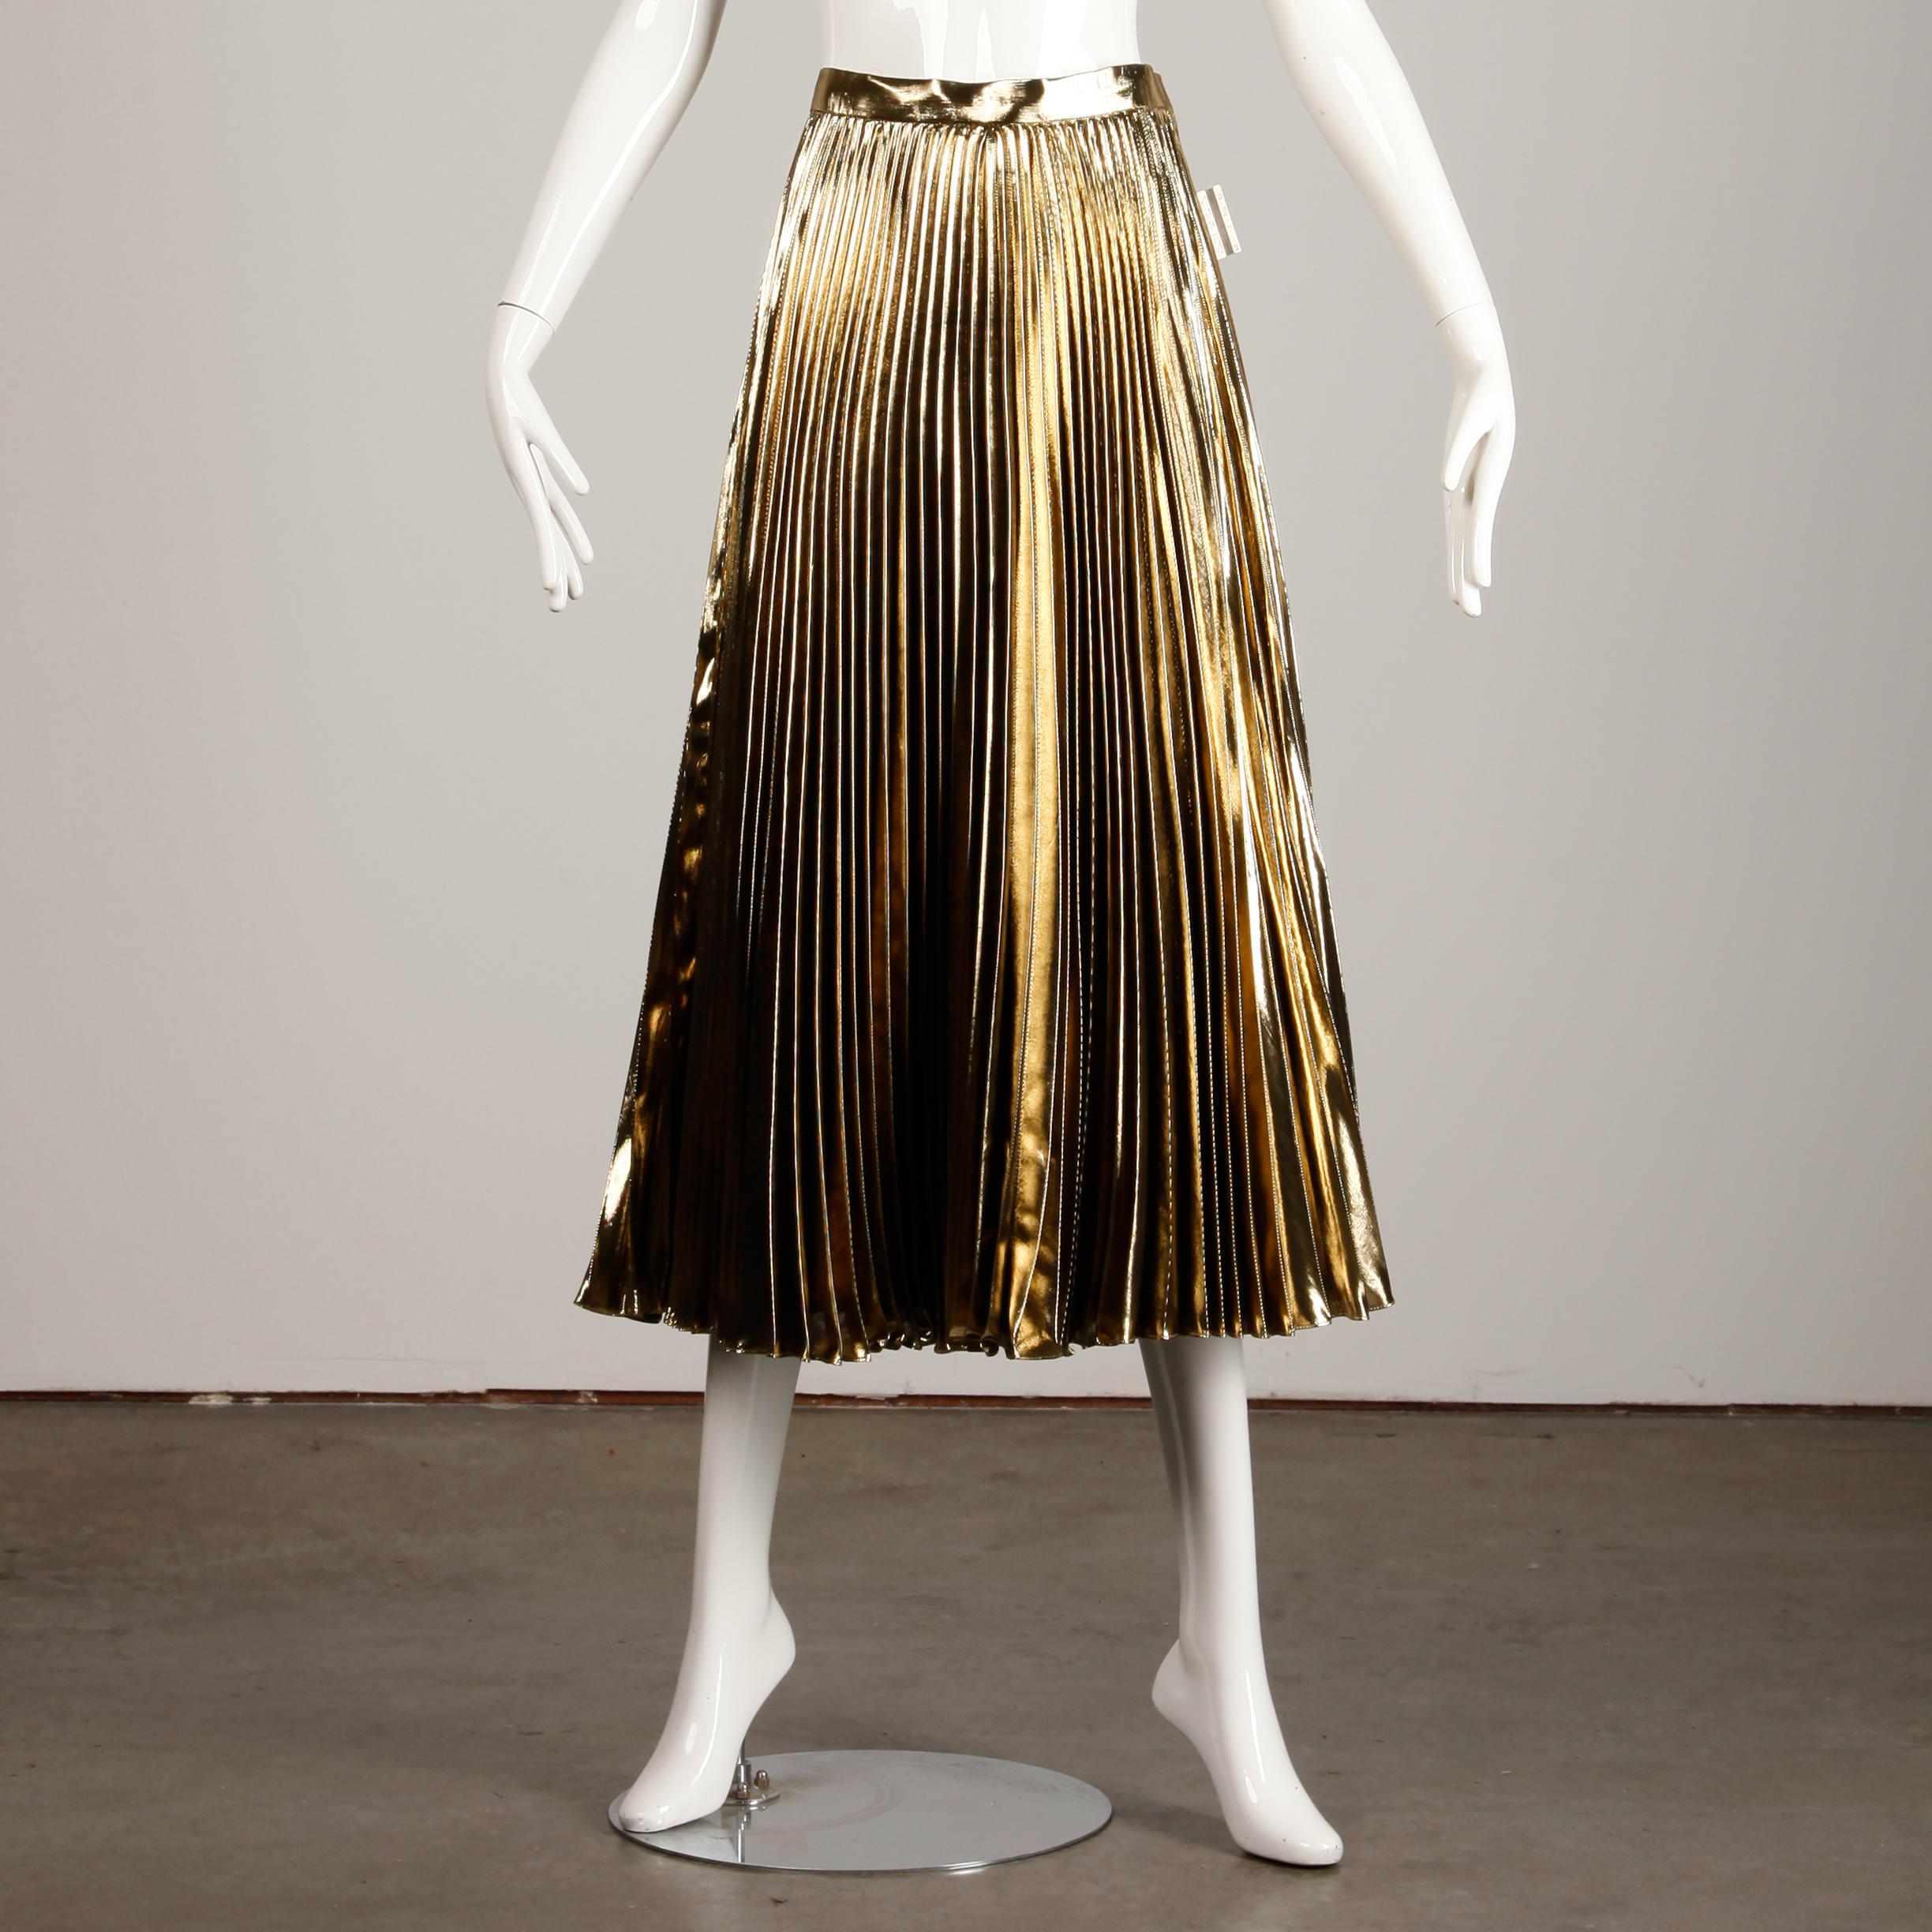 Unworn with the original $258.00 tags attached from Macy's! This vintage skirt features shiny metallic gold lamé pleated fabric with a huge sweep. Will fit as a midi or maxi skirt depending on your height. The marked size is a US 12 but the skirt